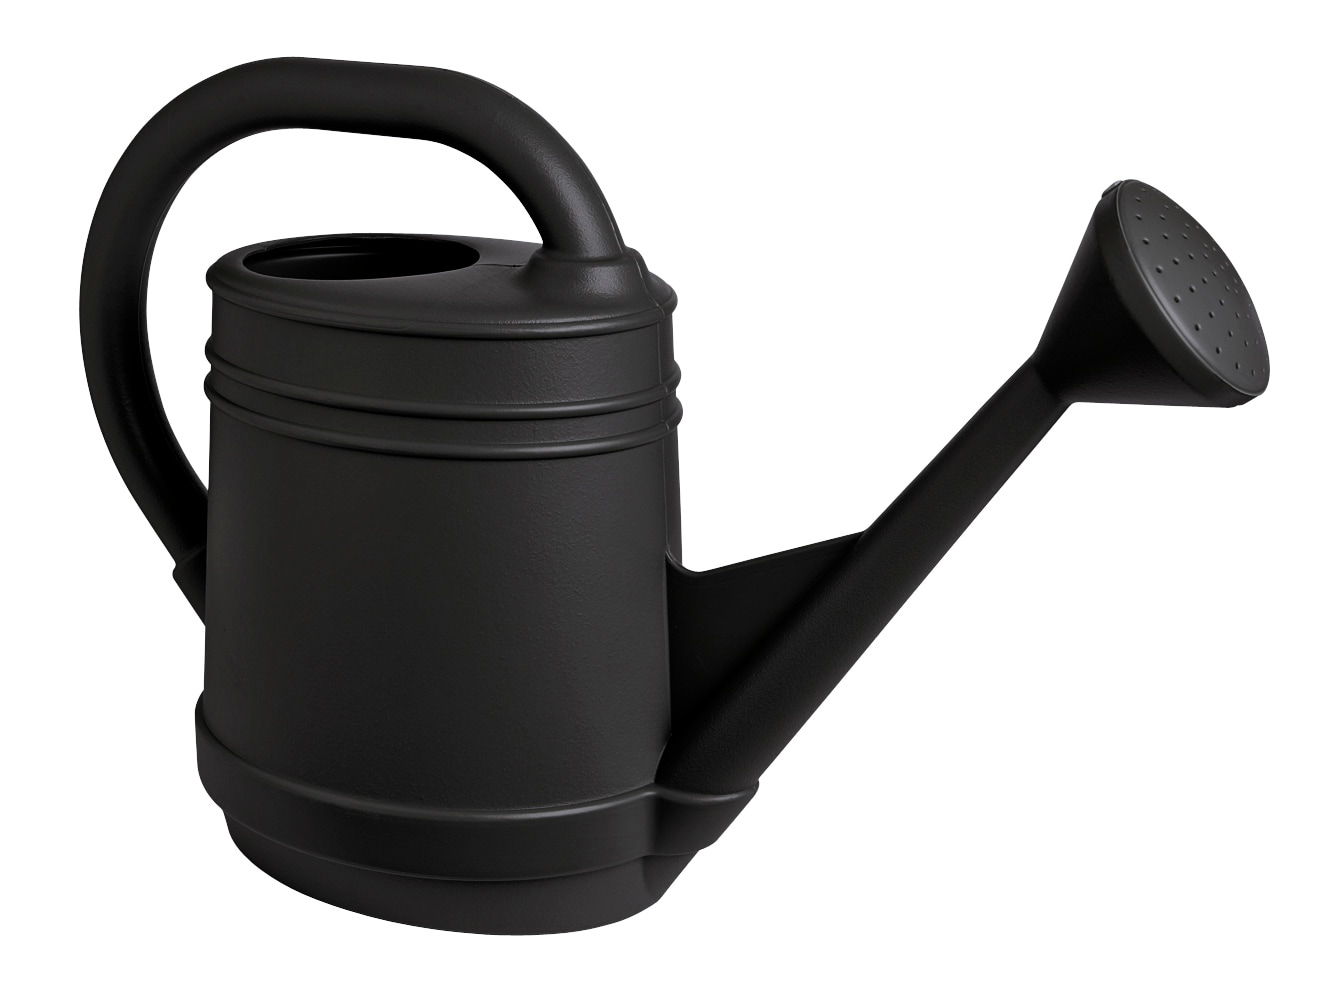 Details about   Bloem 2-Gallon Slate Resin Traditional Designed Light Weight Garden Watering Can 